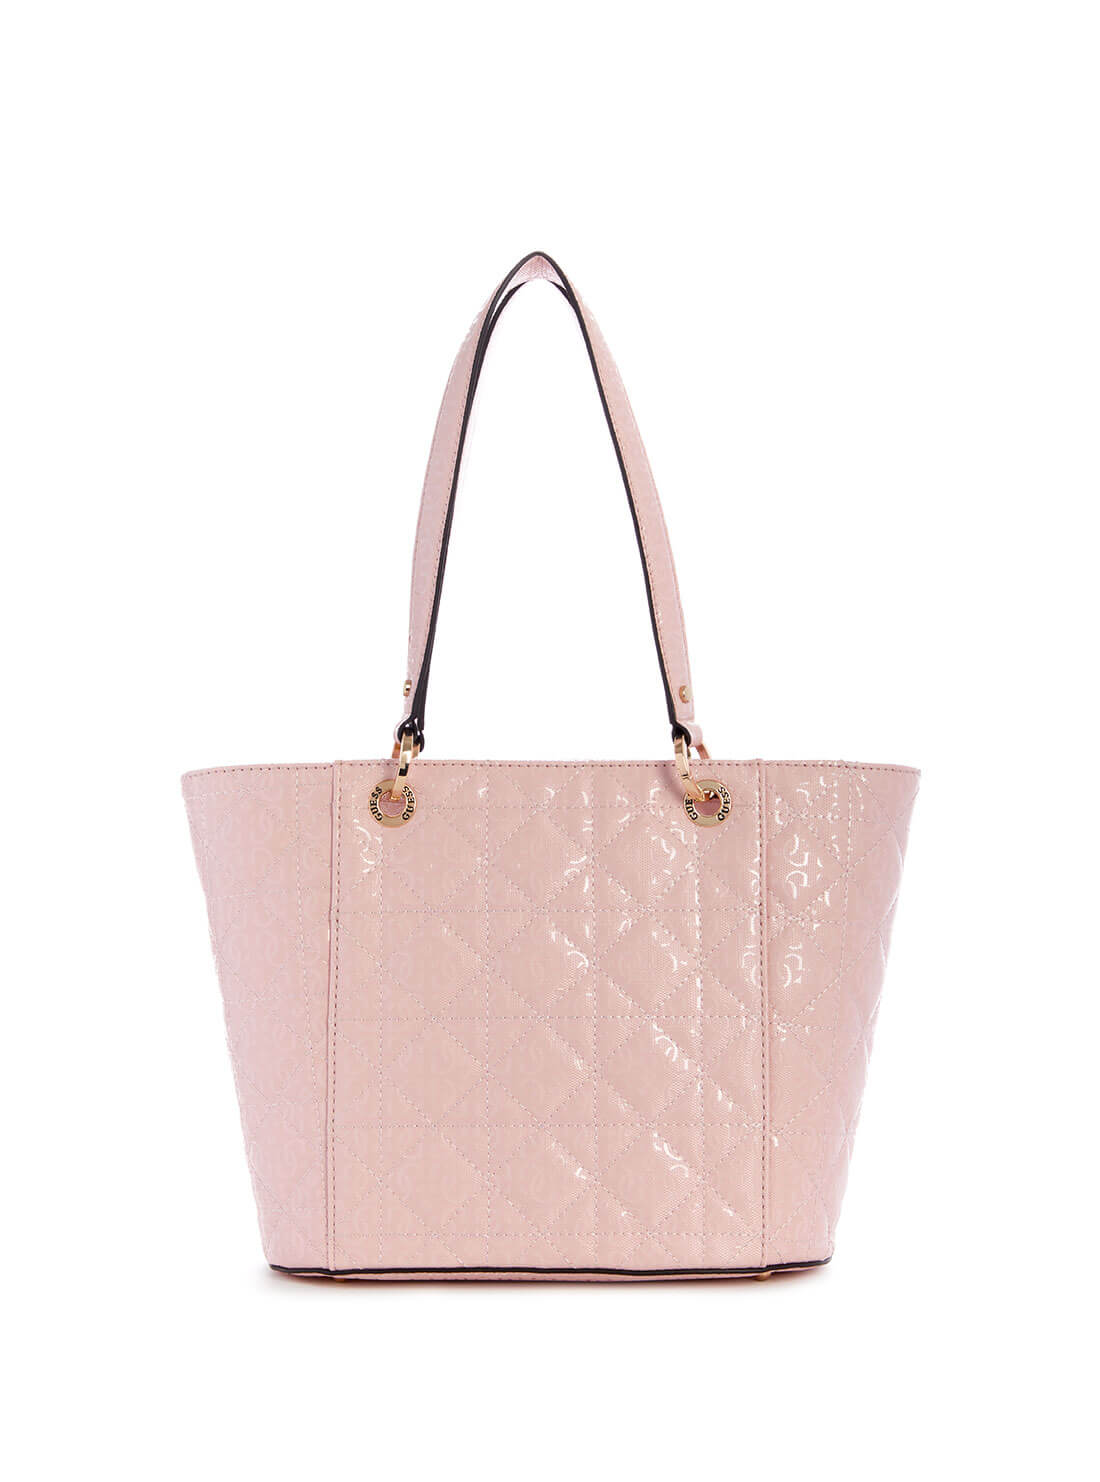 GUESS Womens Pink Noelle Elite Tote Bag GS787922 Back View